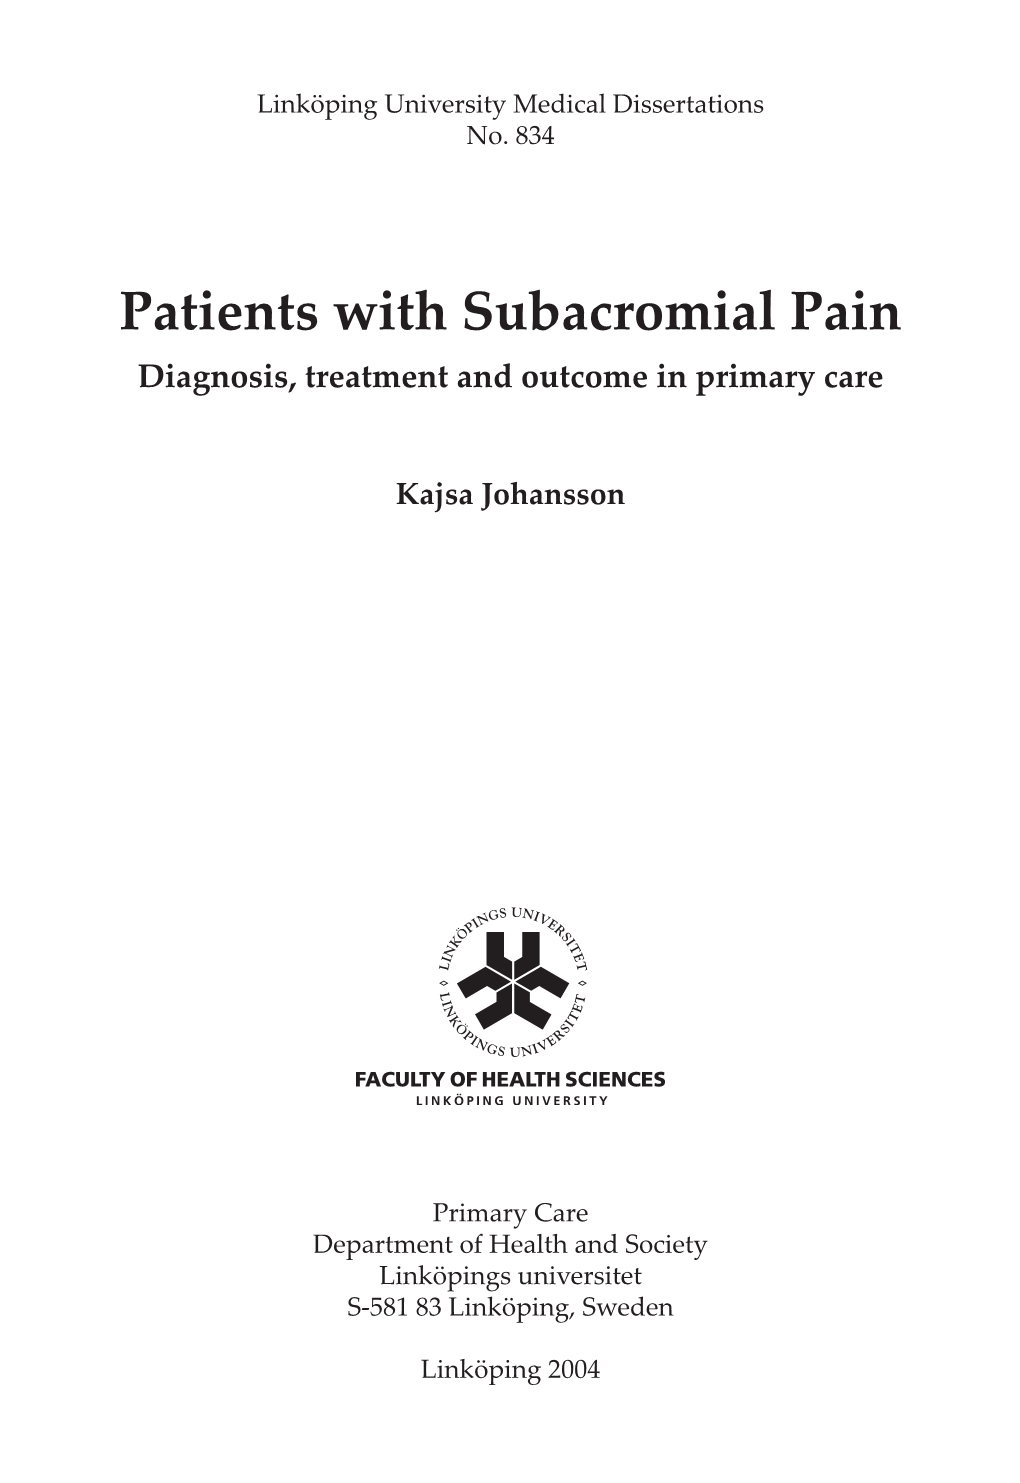 Patients with Subacromial Pain Diagnosis, Treatment and Outcome in Primary Care